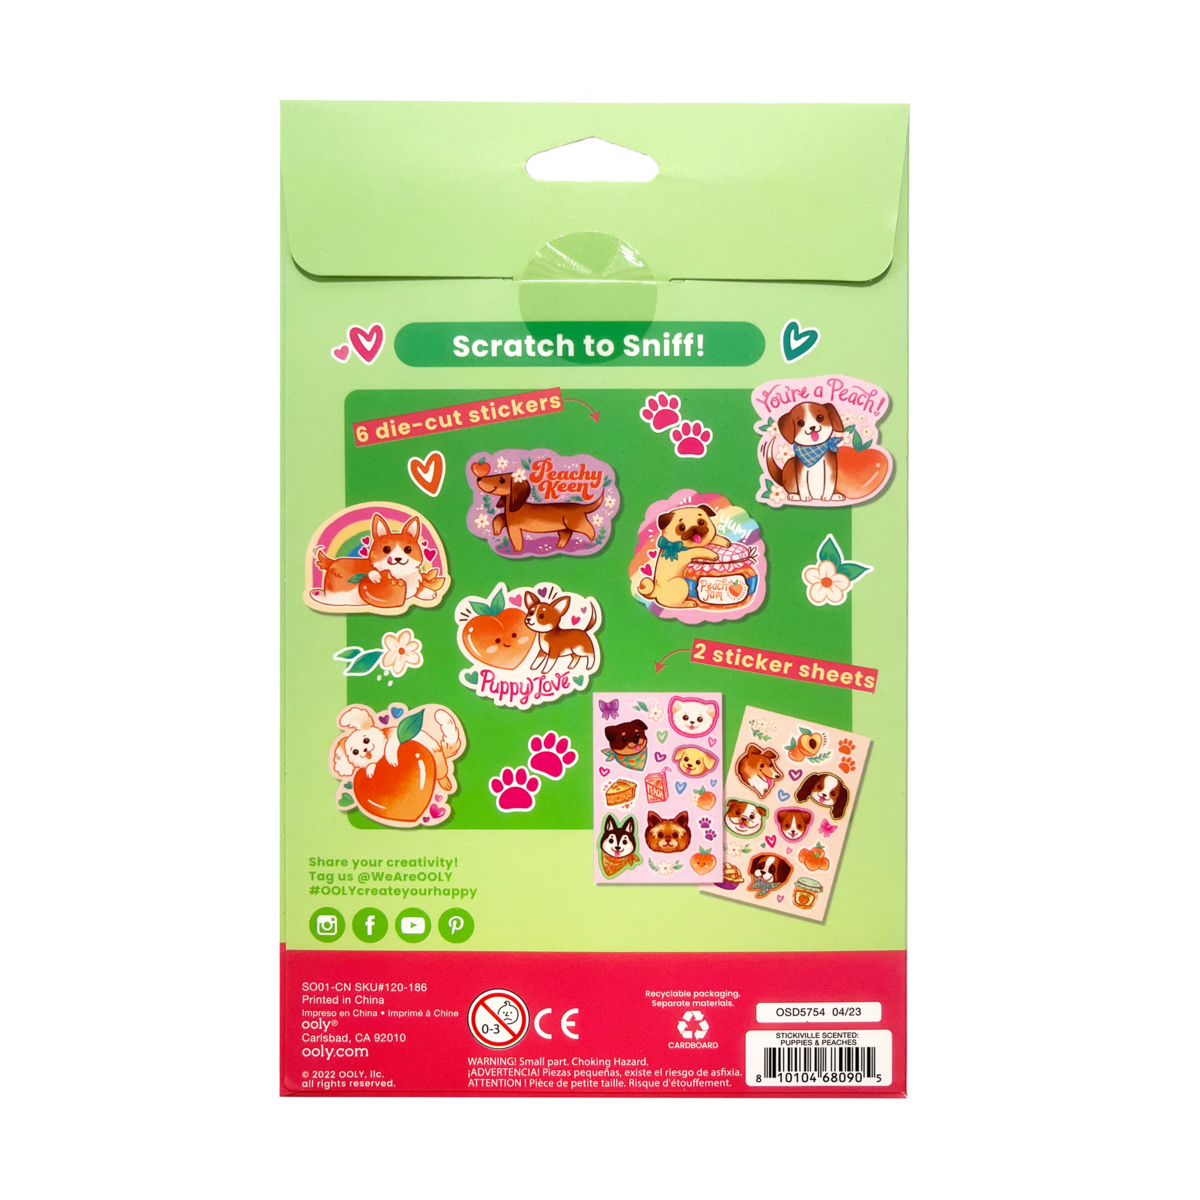 Stickiville Puppies and Peaches scented stickers back of packaging